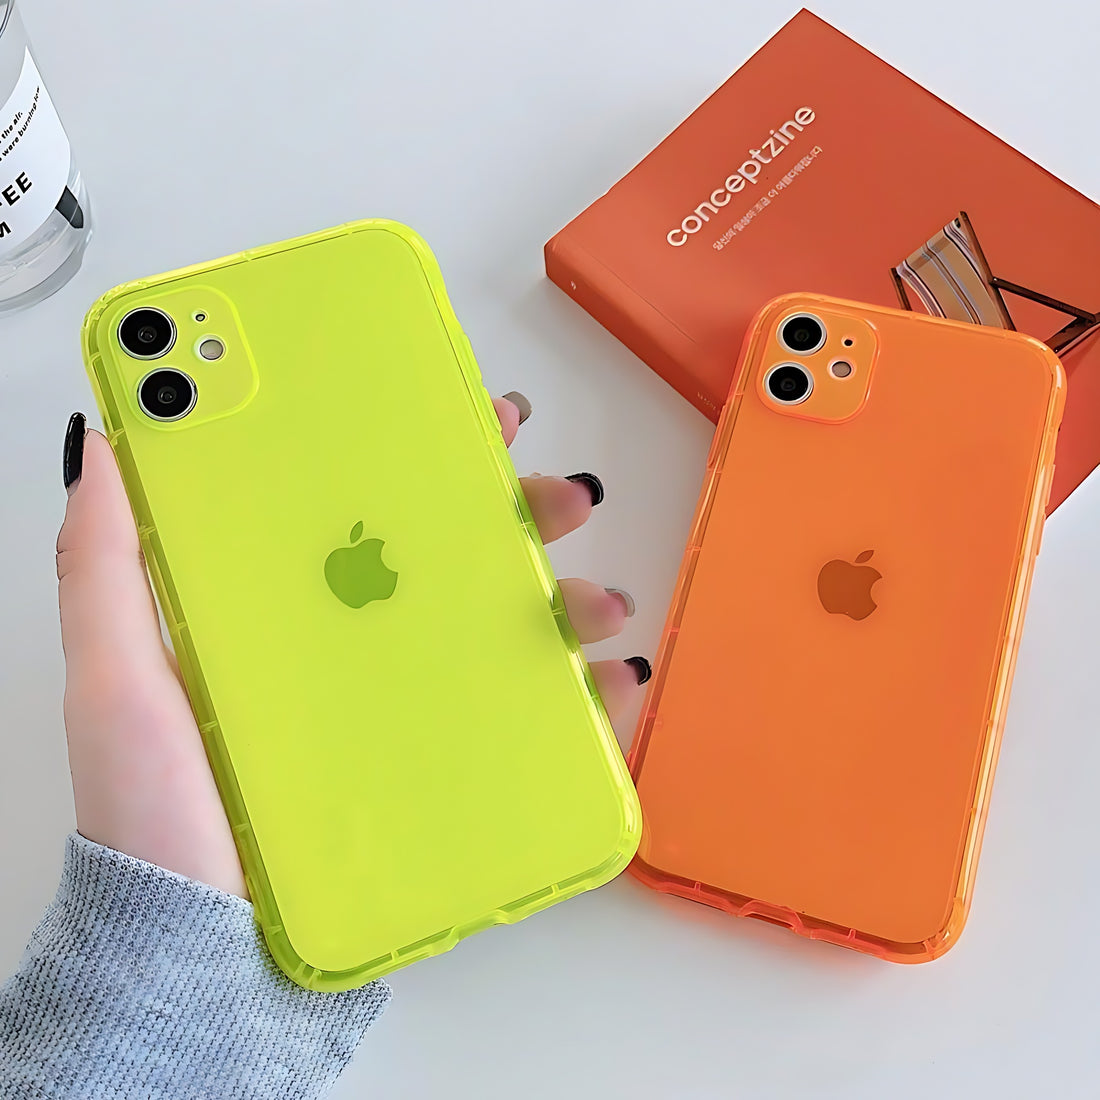 Neon Fluorescent Plain Cute Phone Cases For iPhone 12 Mini 13 11 Pro Max XR X XS Max 7 8 Plus - Touchy Style .